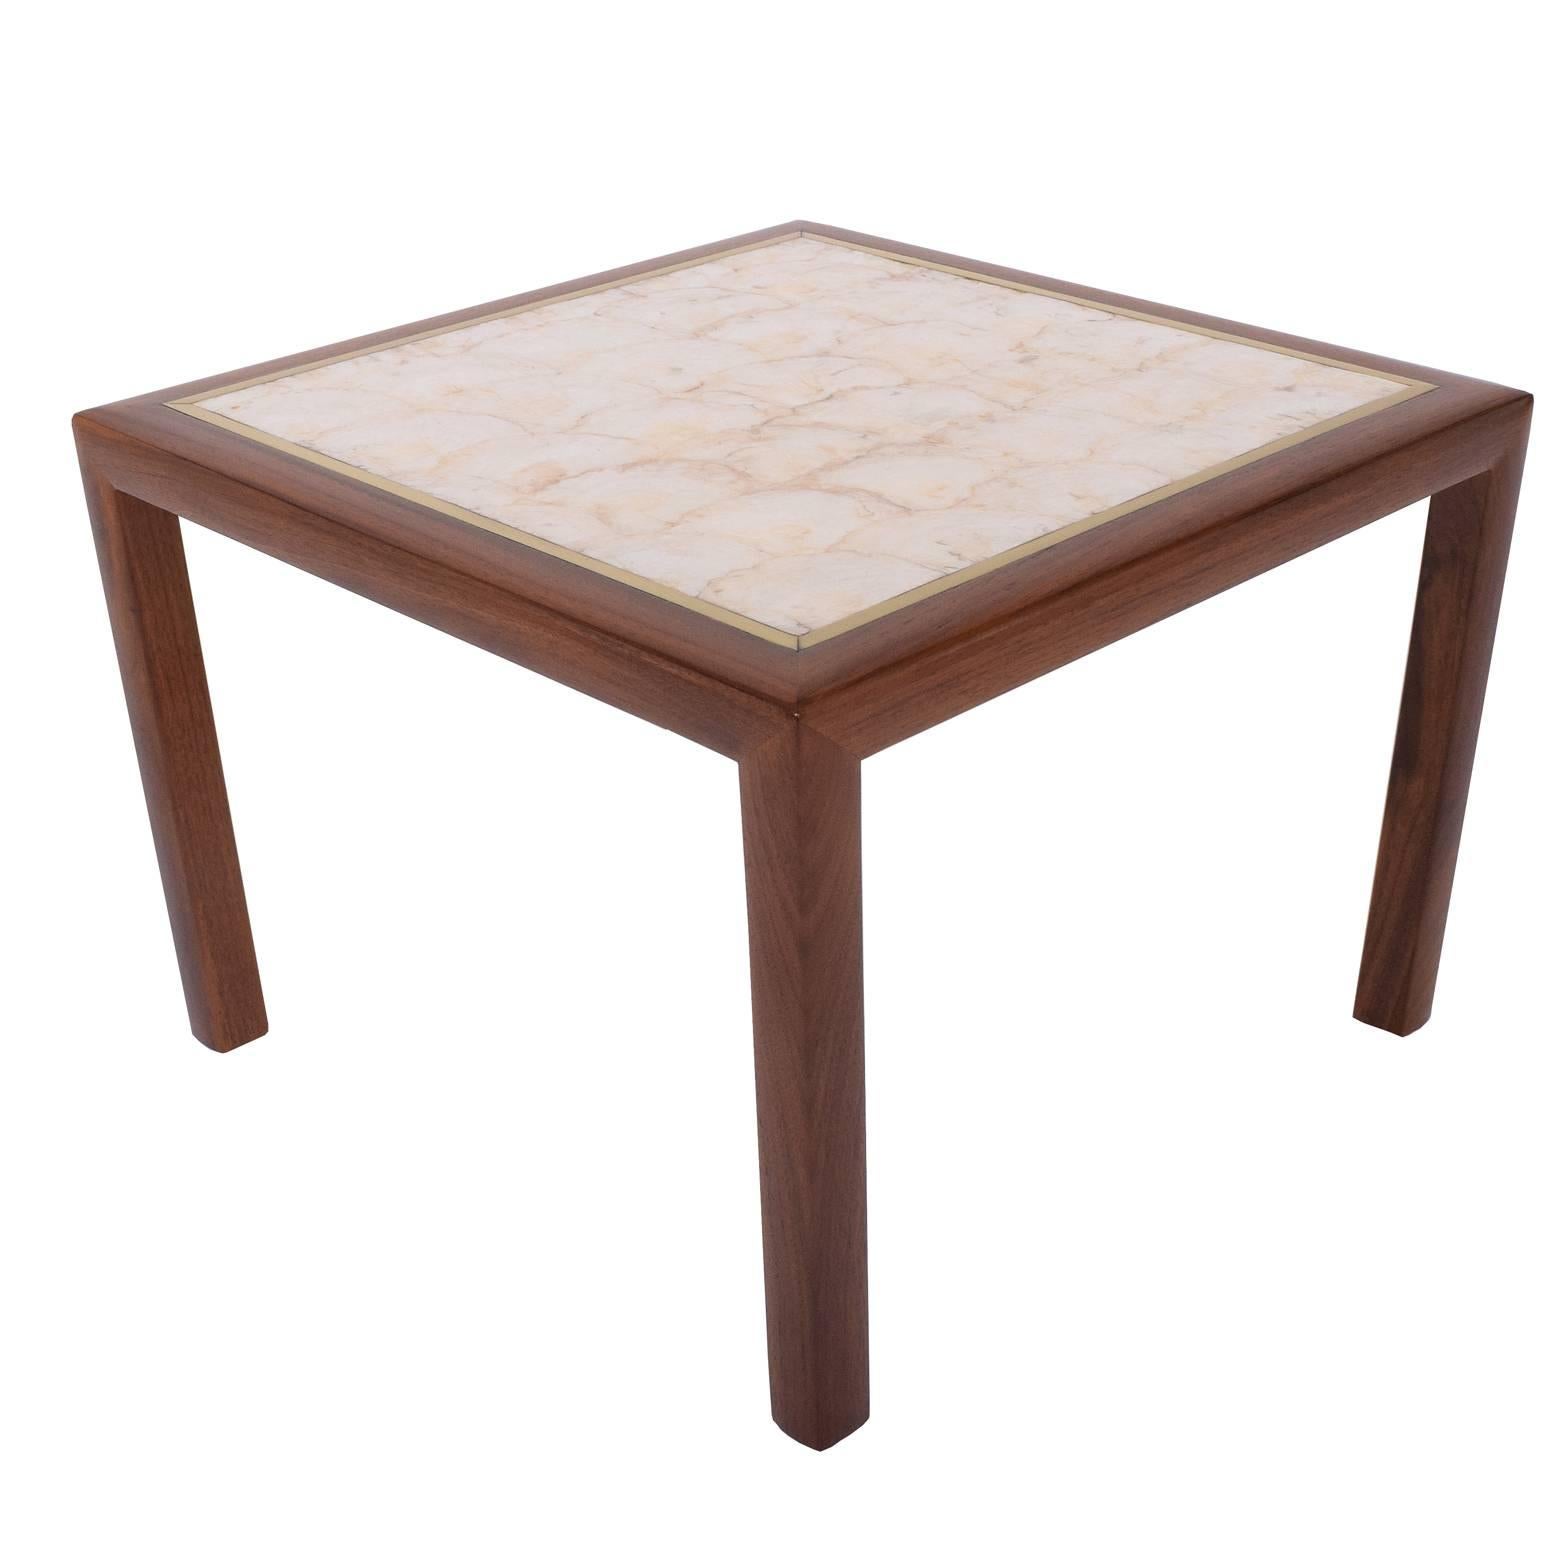 Nice quality solid walnut wood frame side table with beautiful pearlized seashell top and brass trim. Likely from the 1960s.